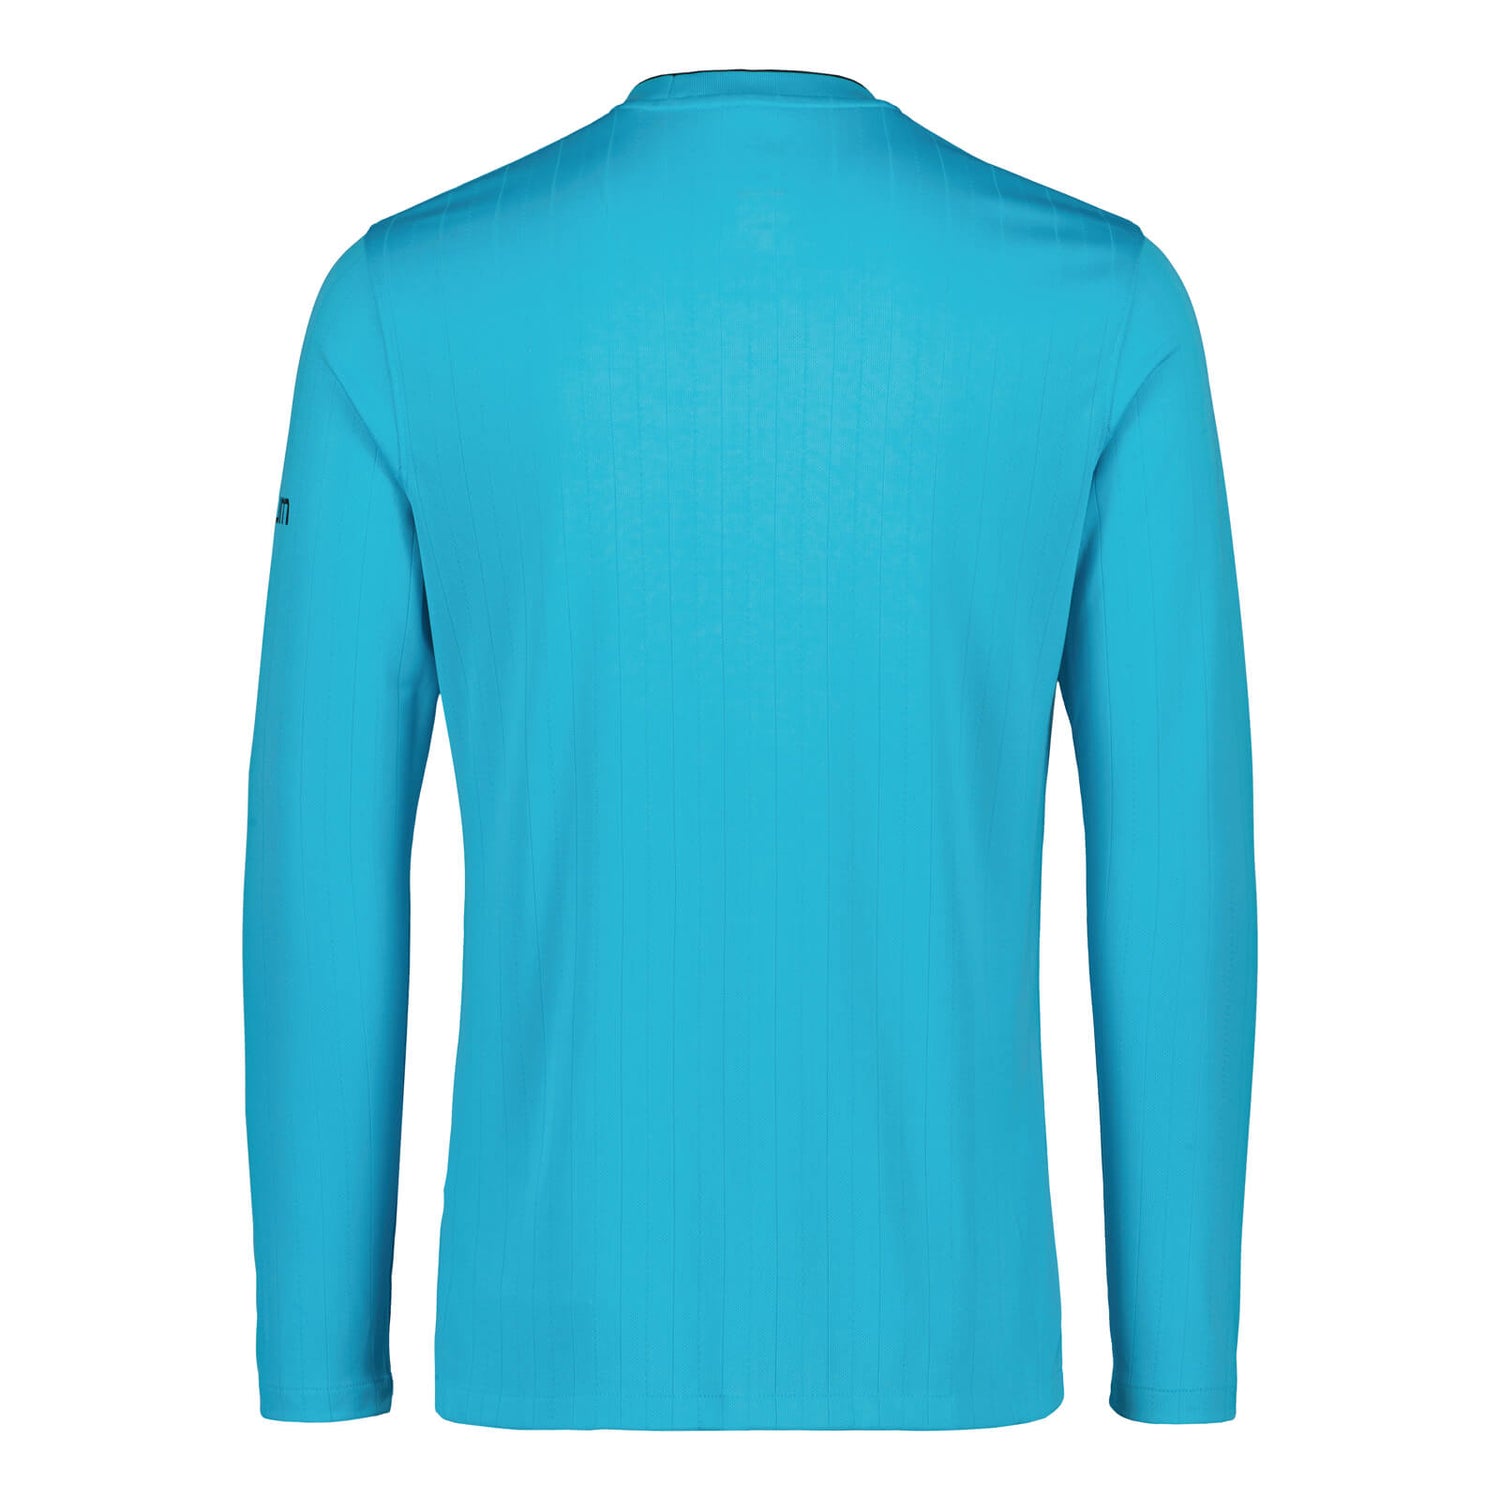 Referee's long-sleeved shirt + referee badge, Turquoise